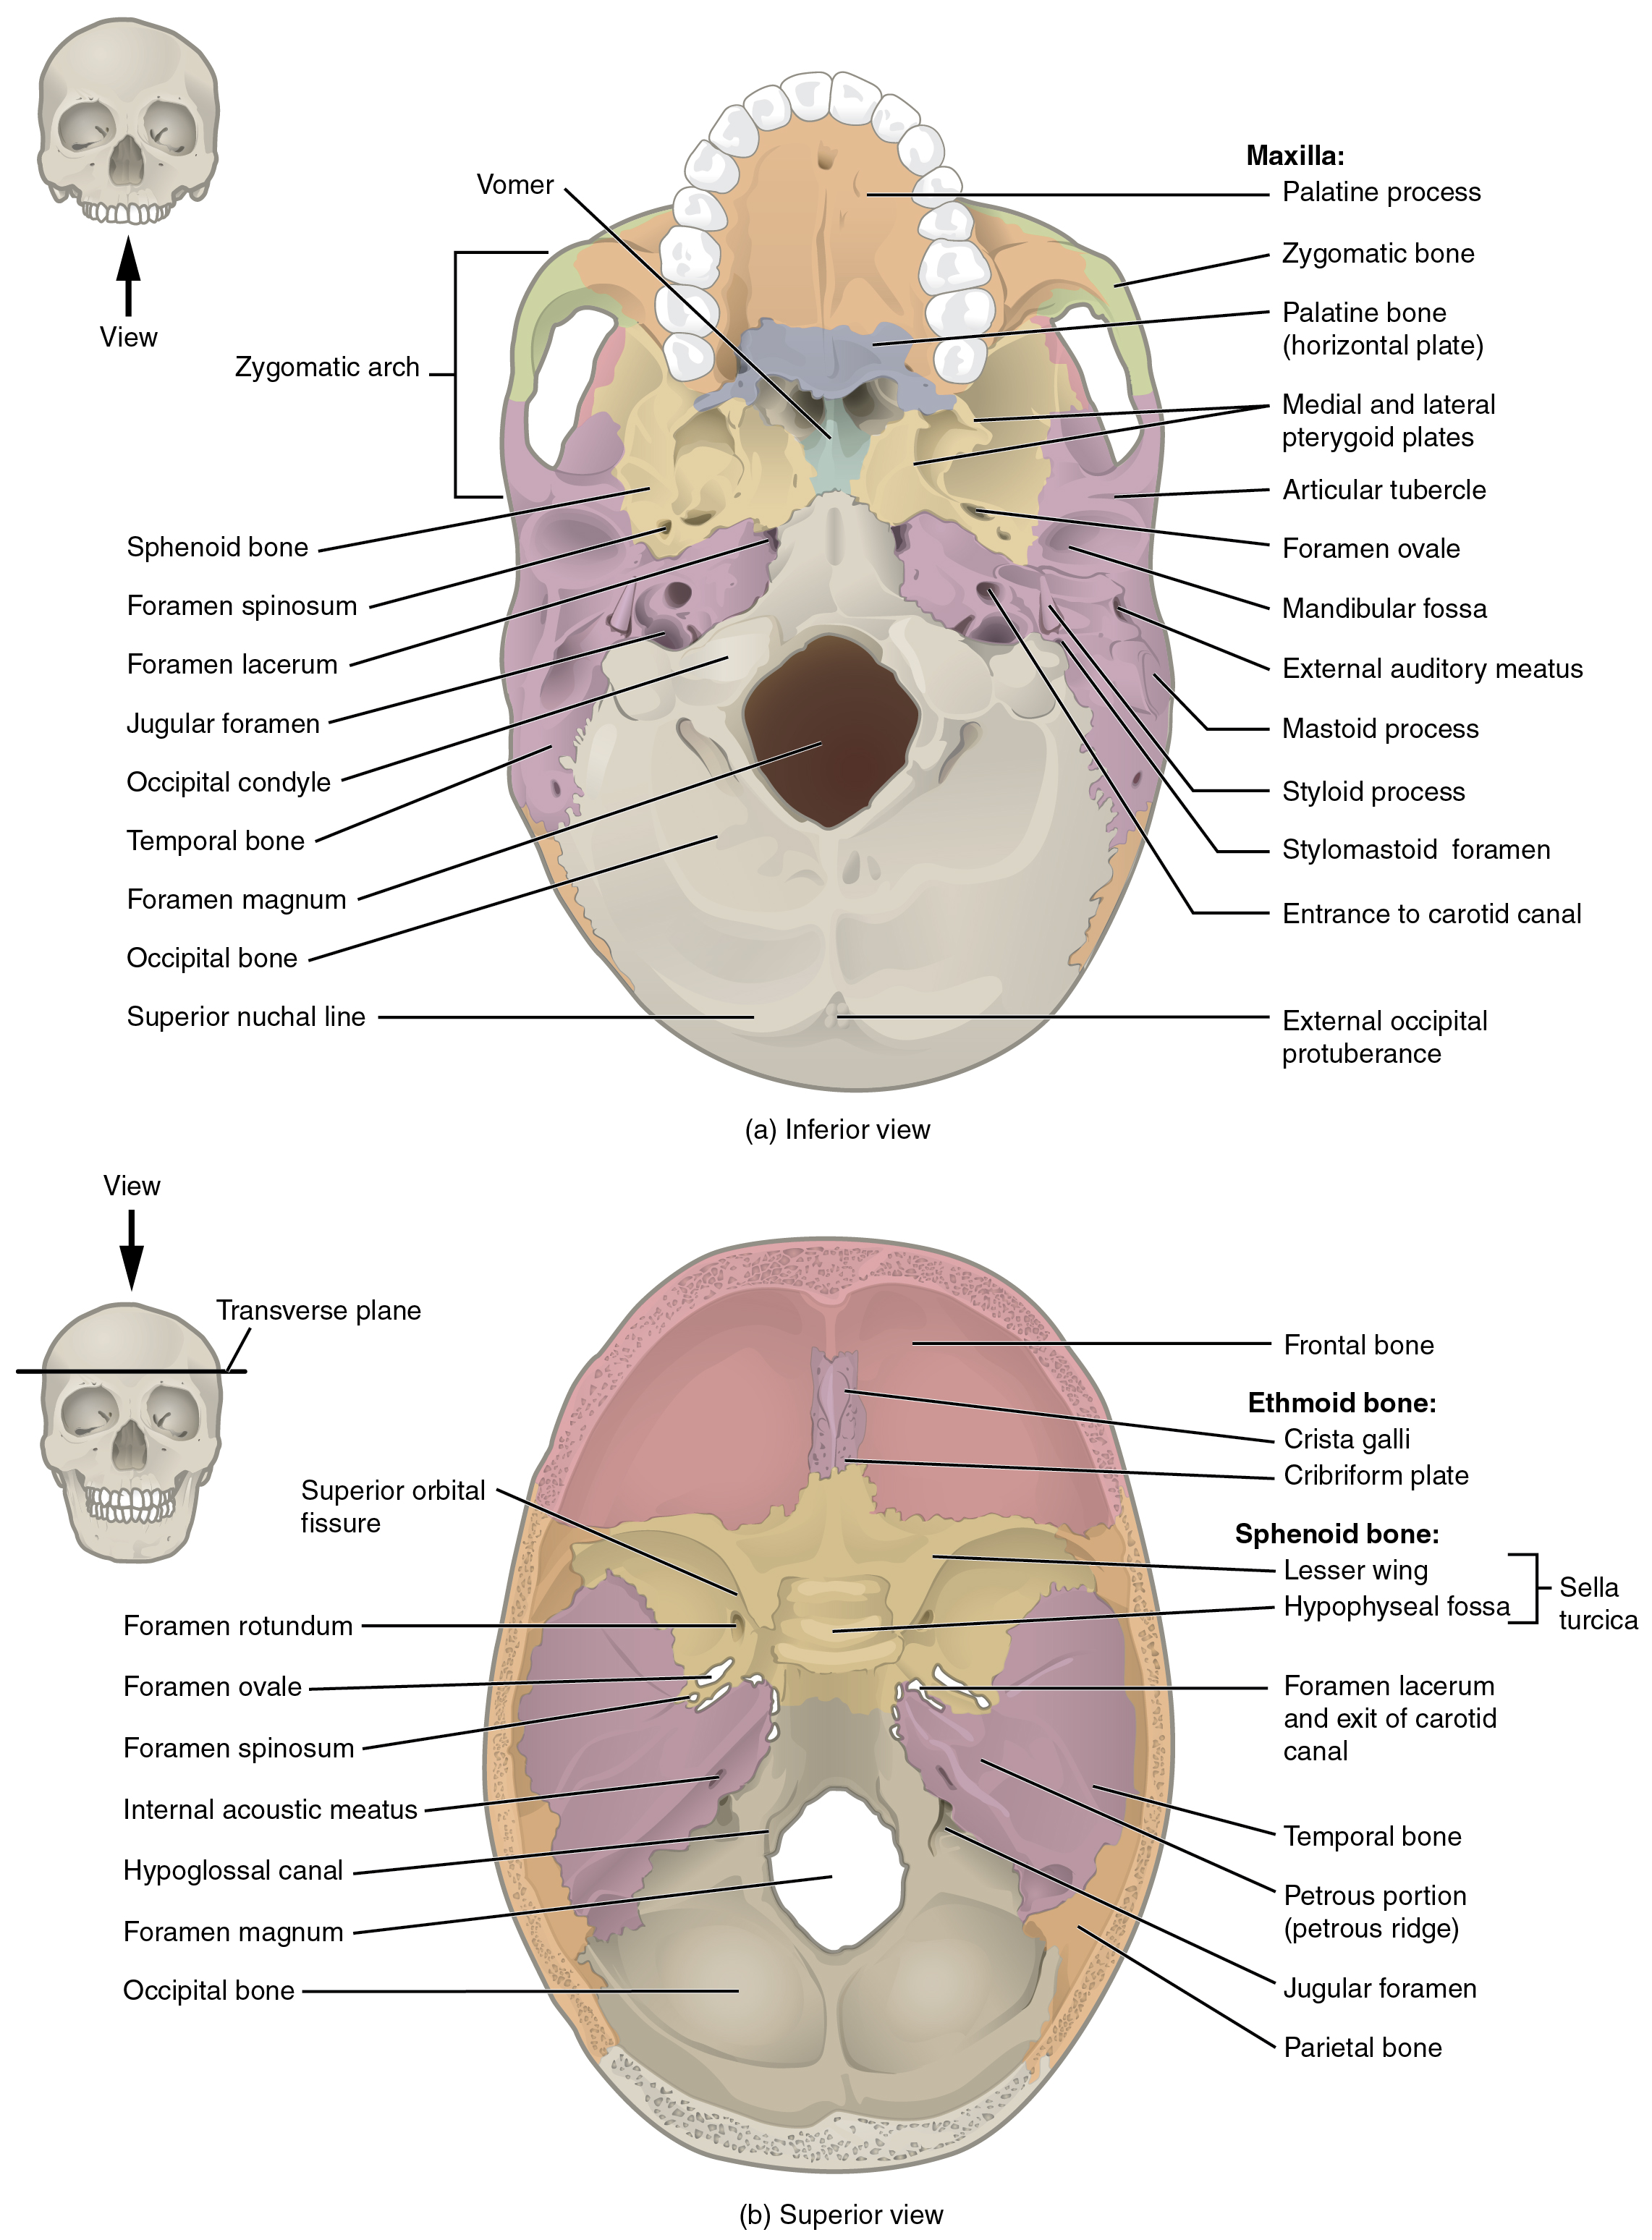 This image shows the superior and inferior view of the skull base. In